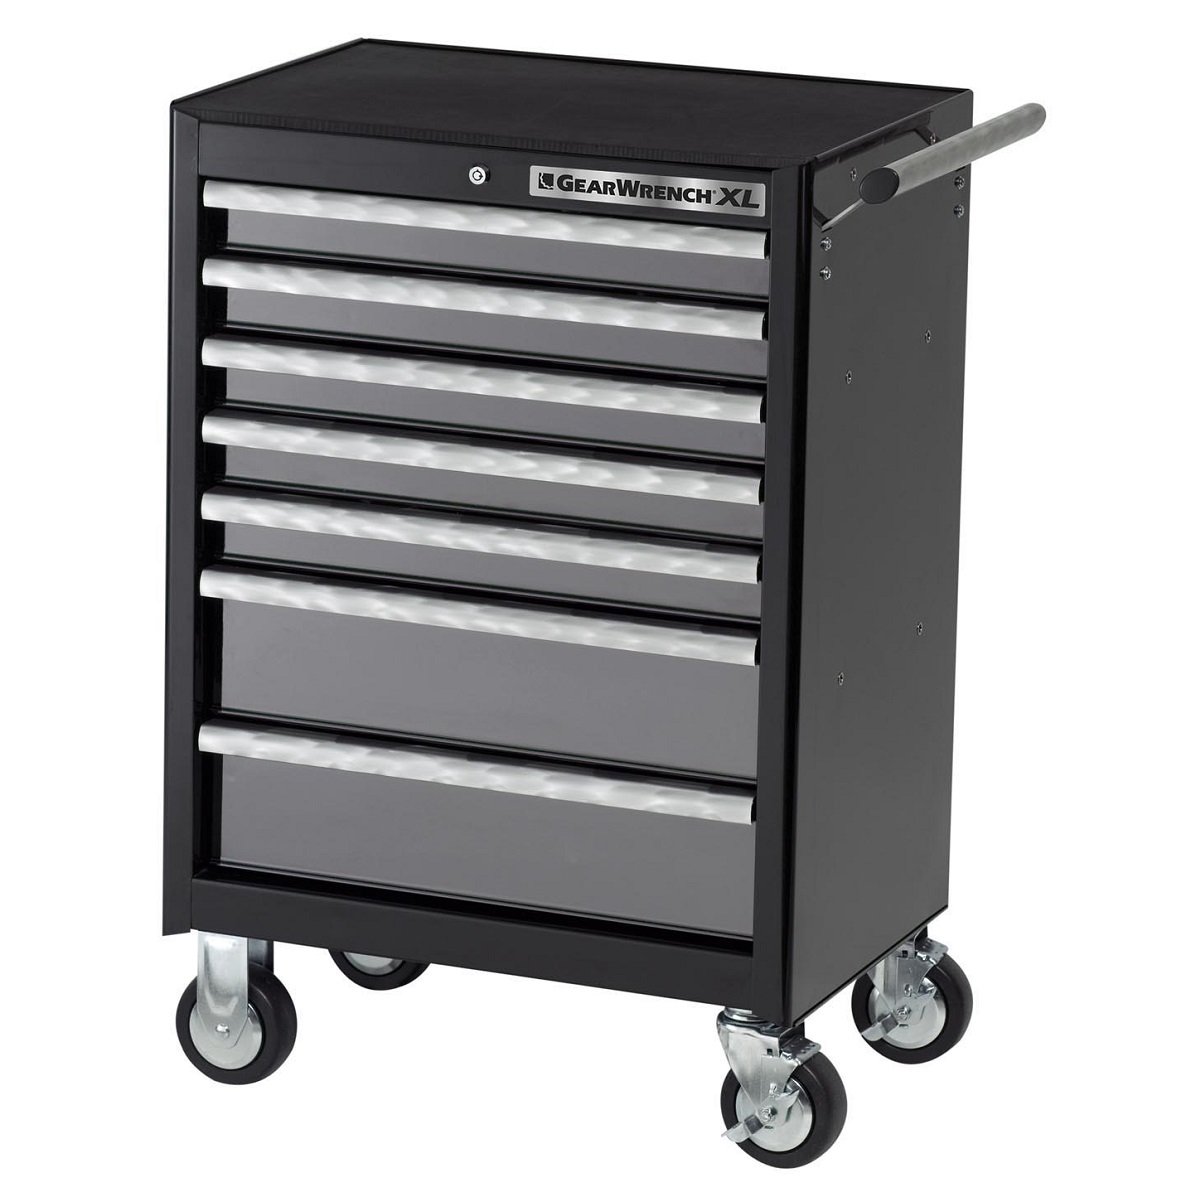 GearWrench 26" 7 Drawer Roller Cabinet, XL Series 83155